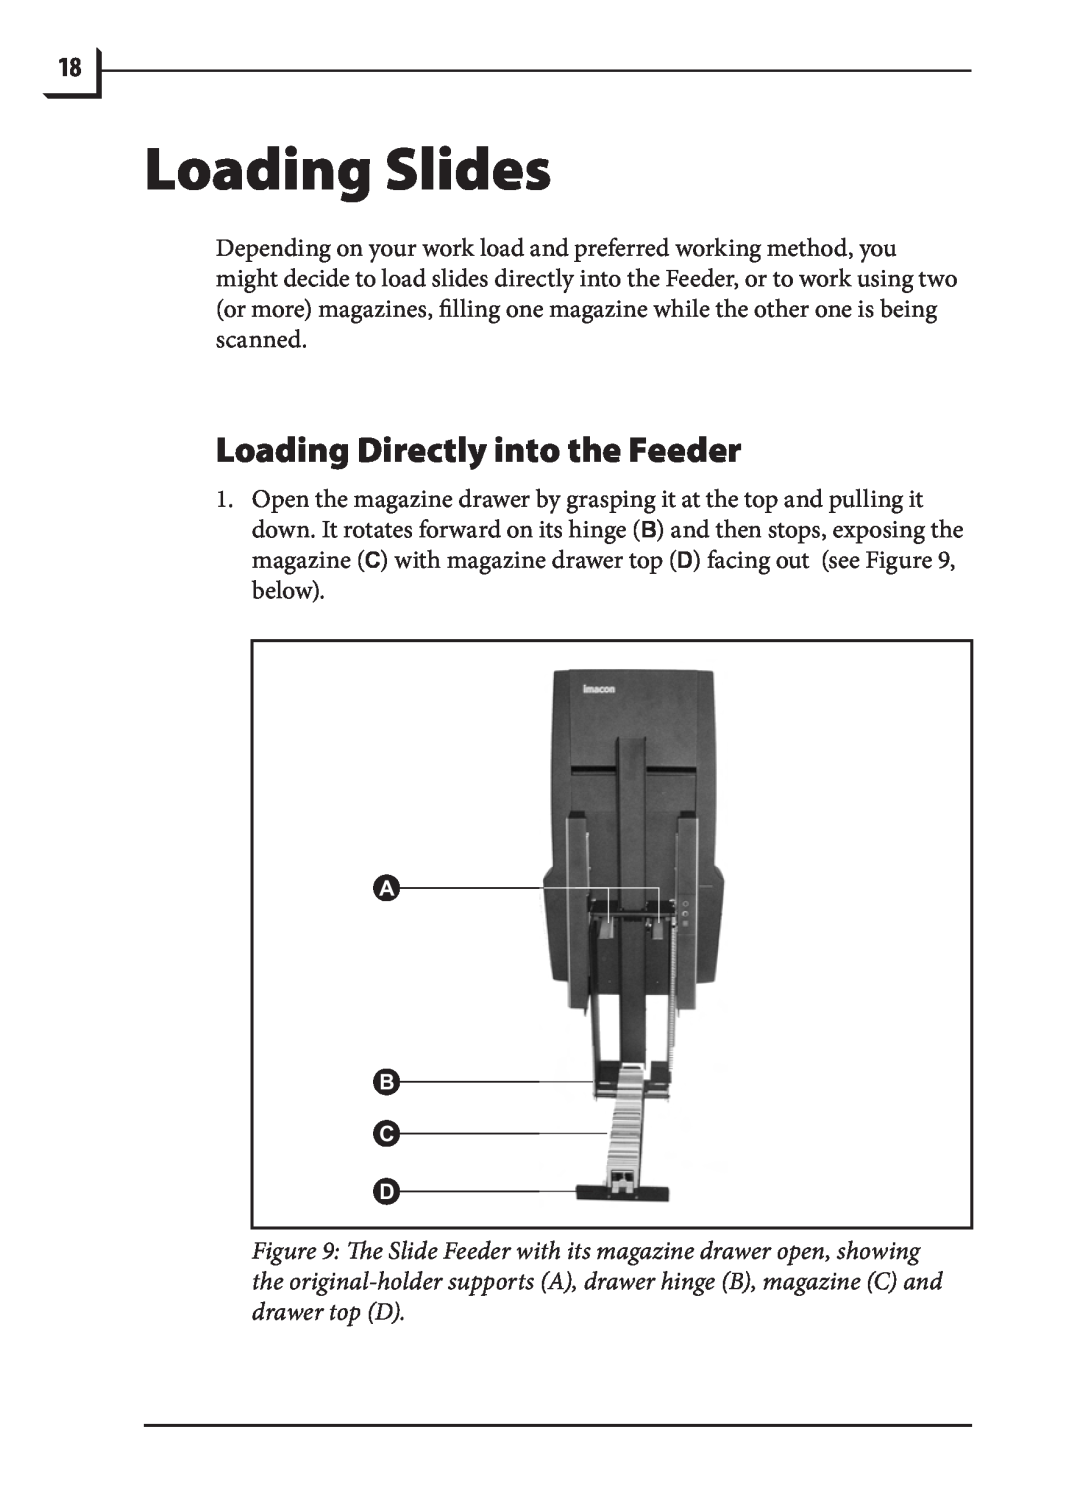 Hasselblad 949 manual Loading Slides, Loading Directly into the Feeder 